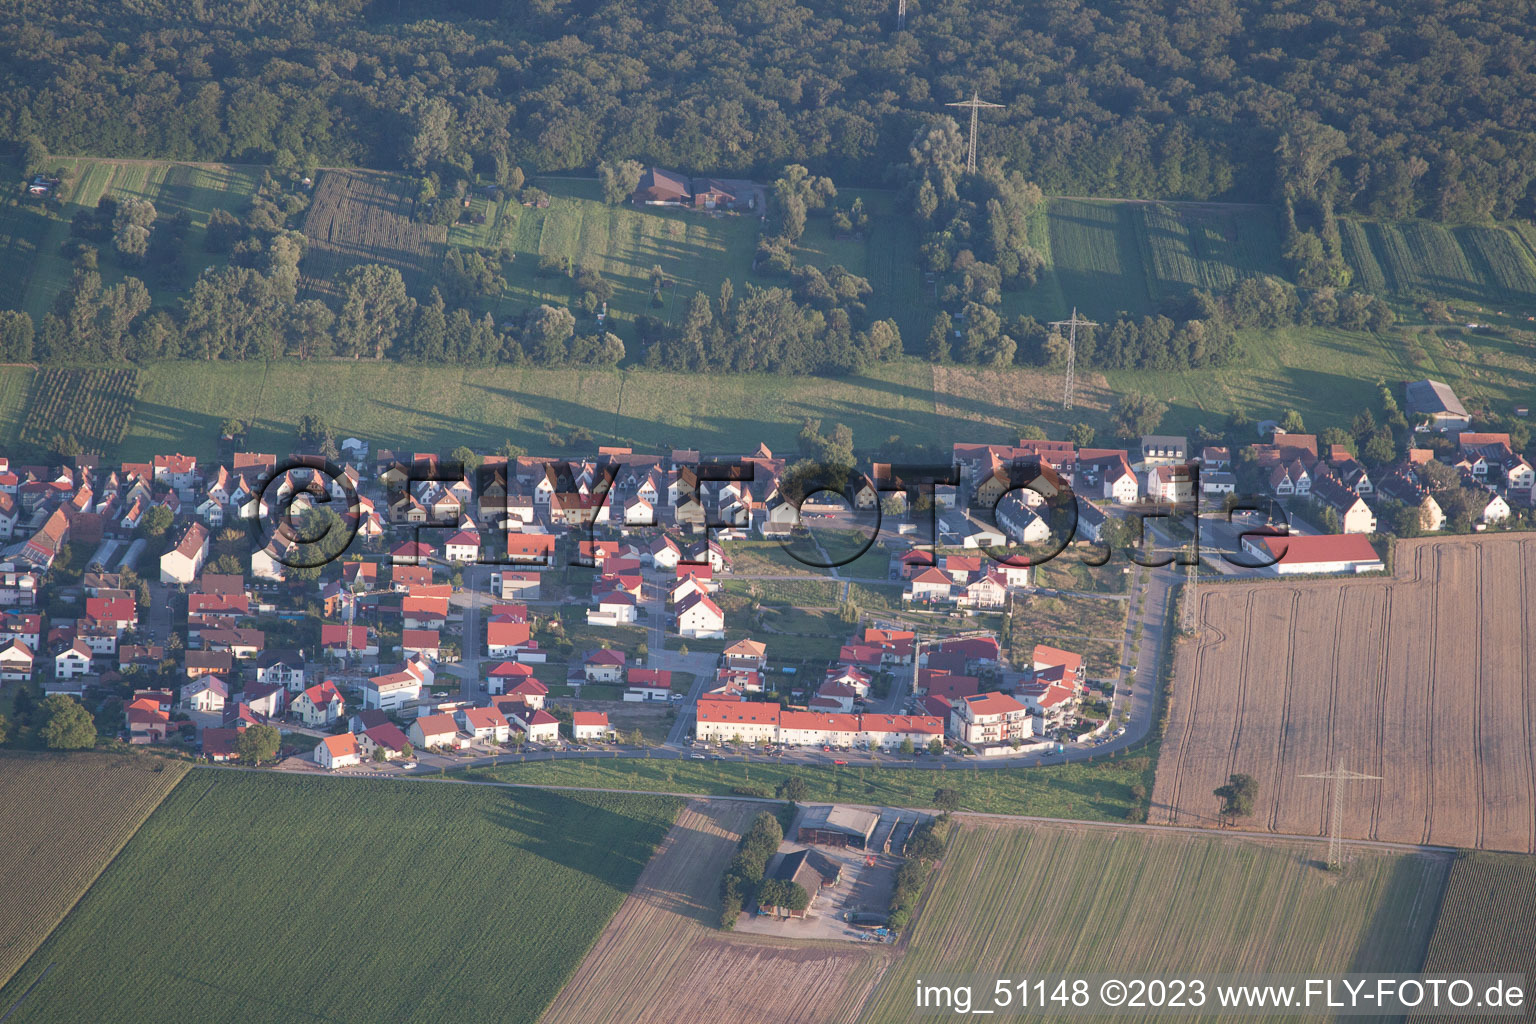 District Minderslachen in Kandel in the state Rhineland-Palatinate, Germany seen from a drone